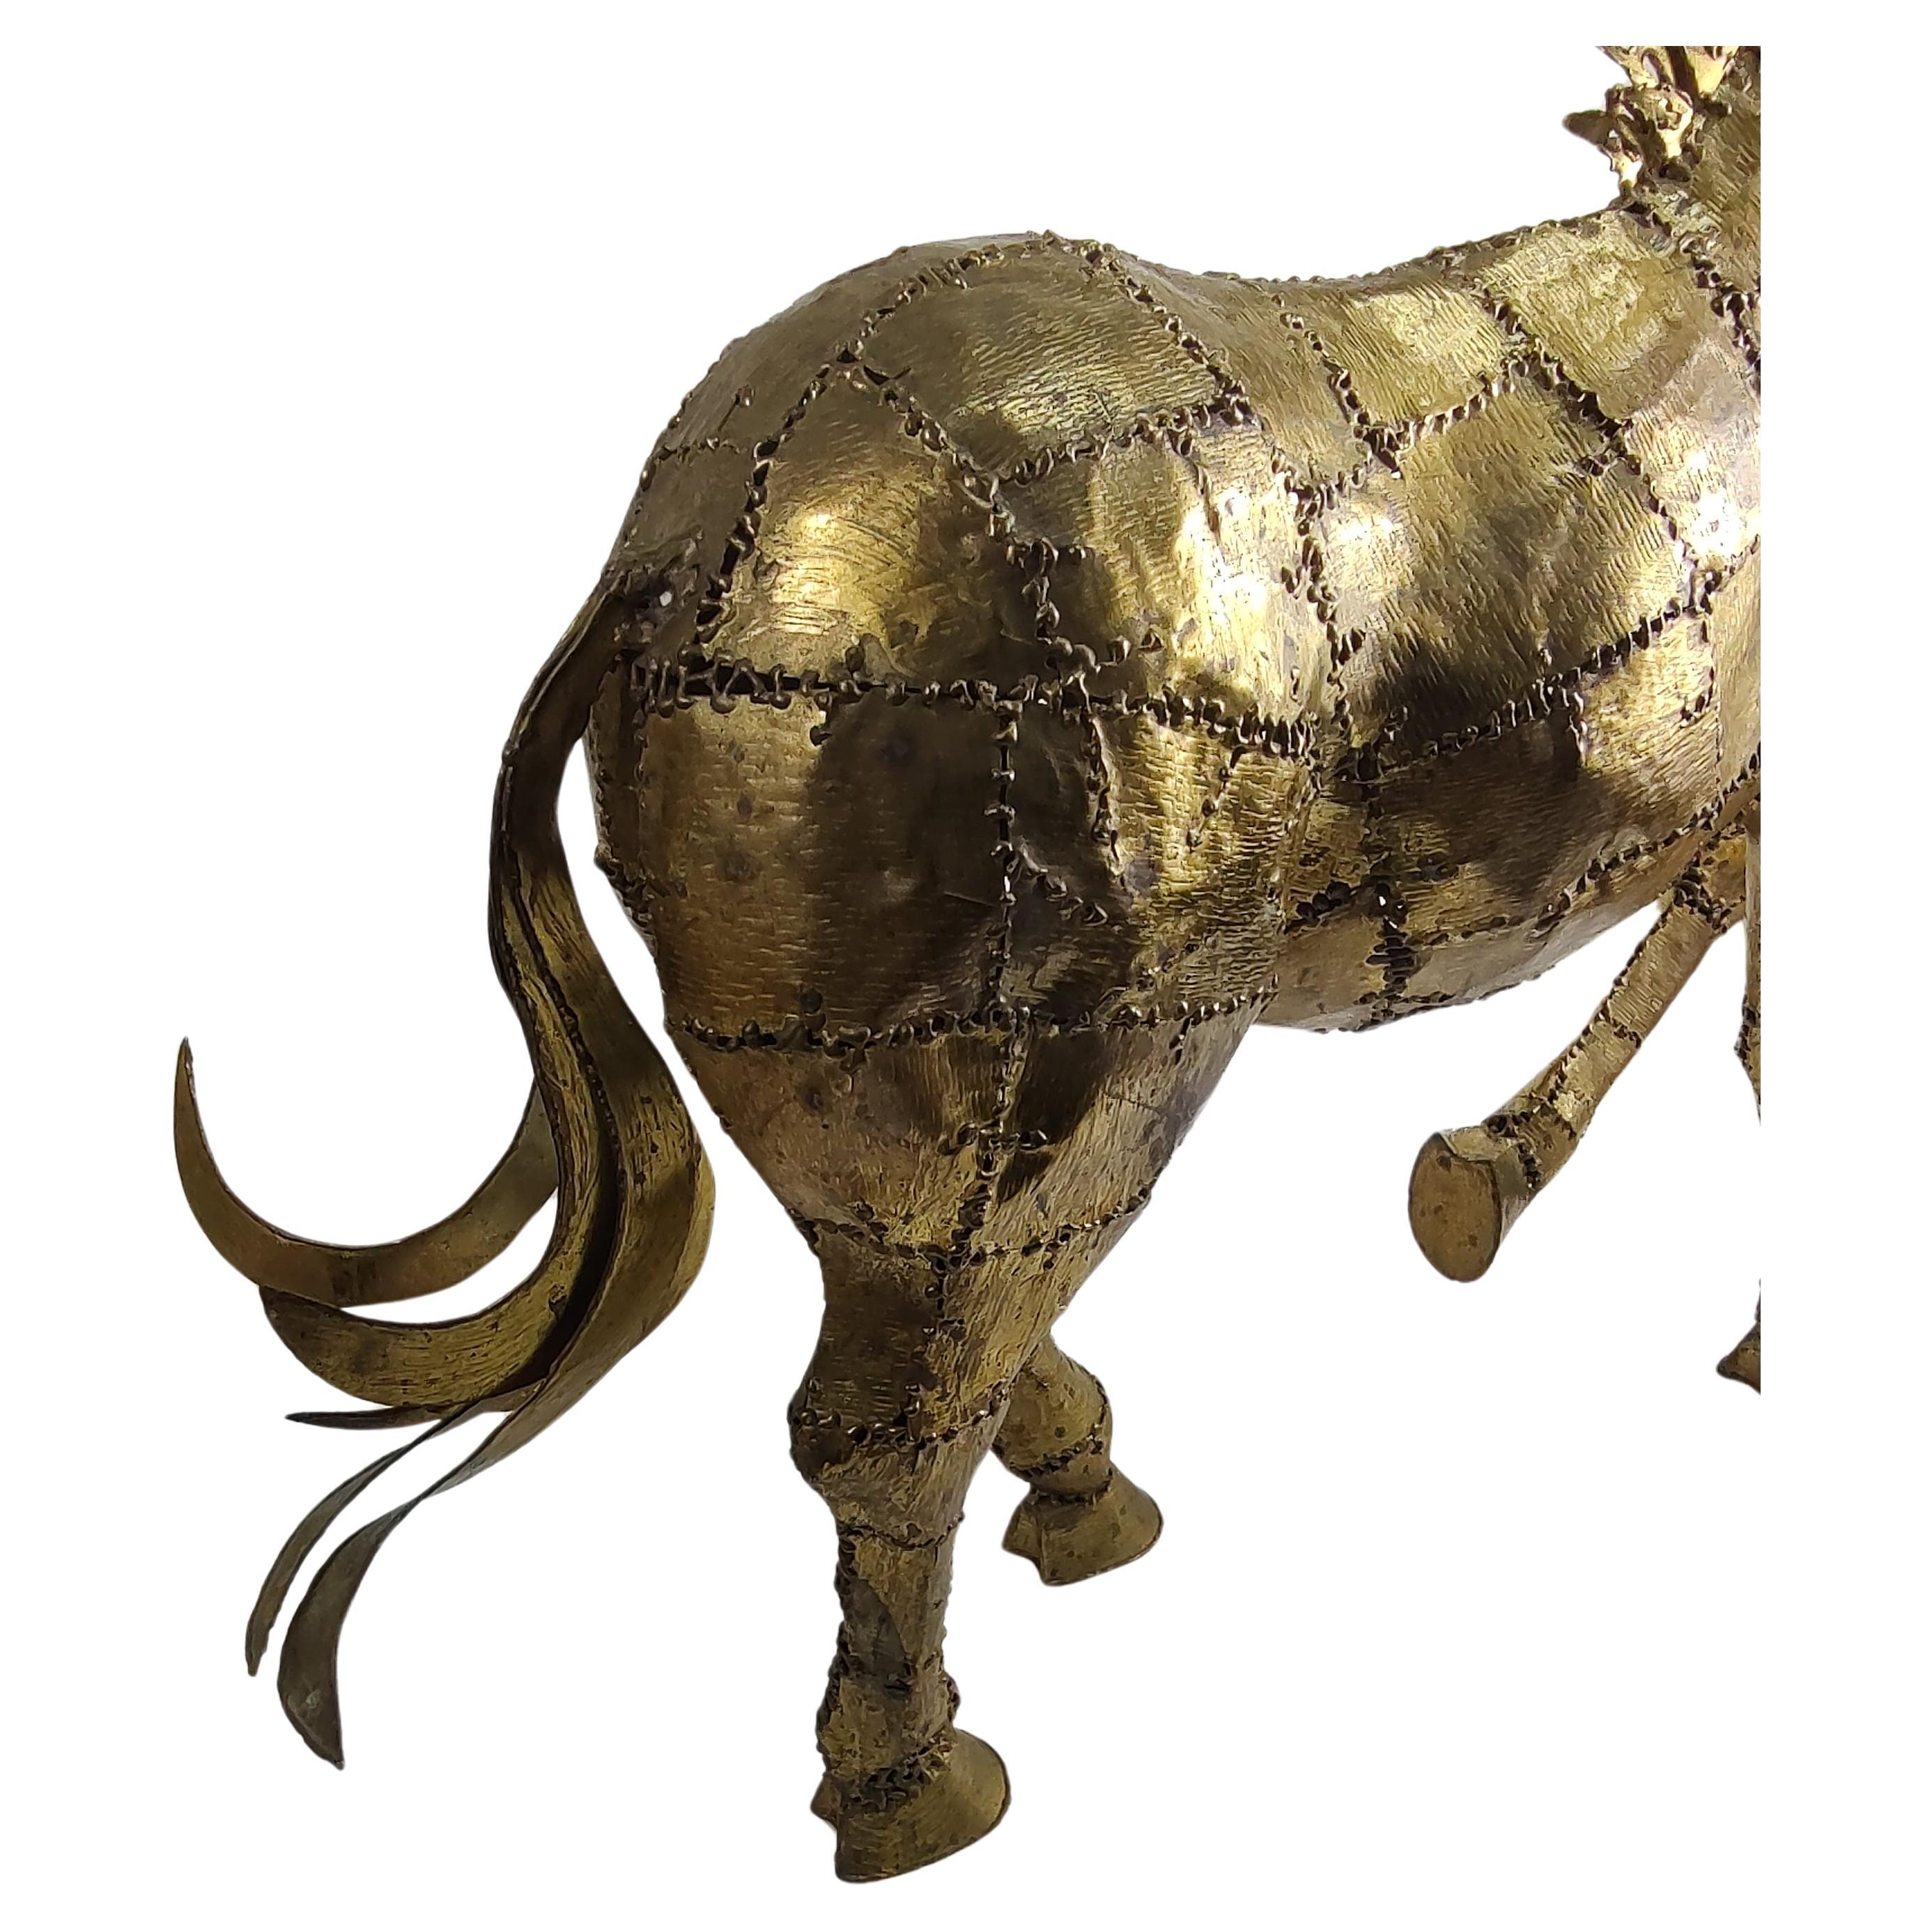 Hand-Crafted Large Mid Century Modern Sculptural Brass Horse by Luciano Bustamante 1965 For Sale